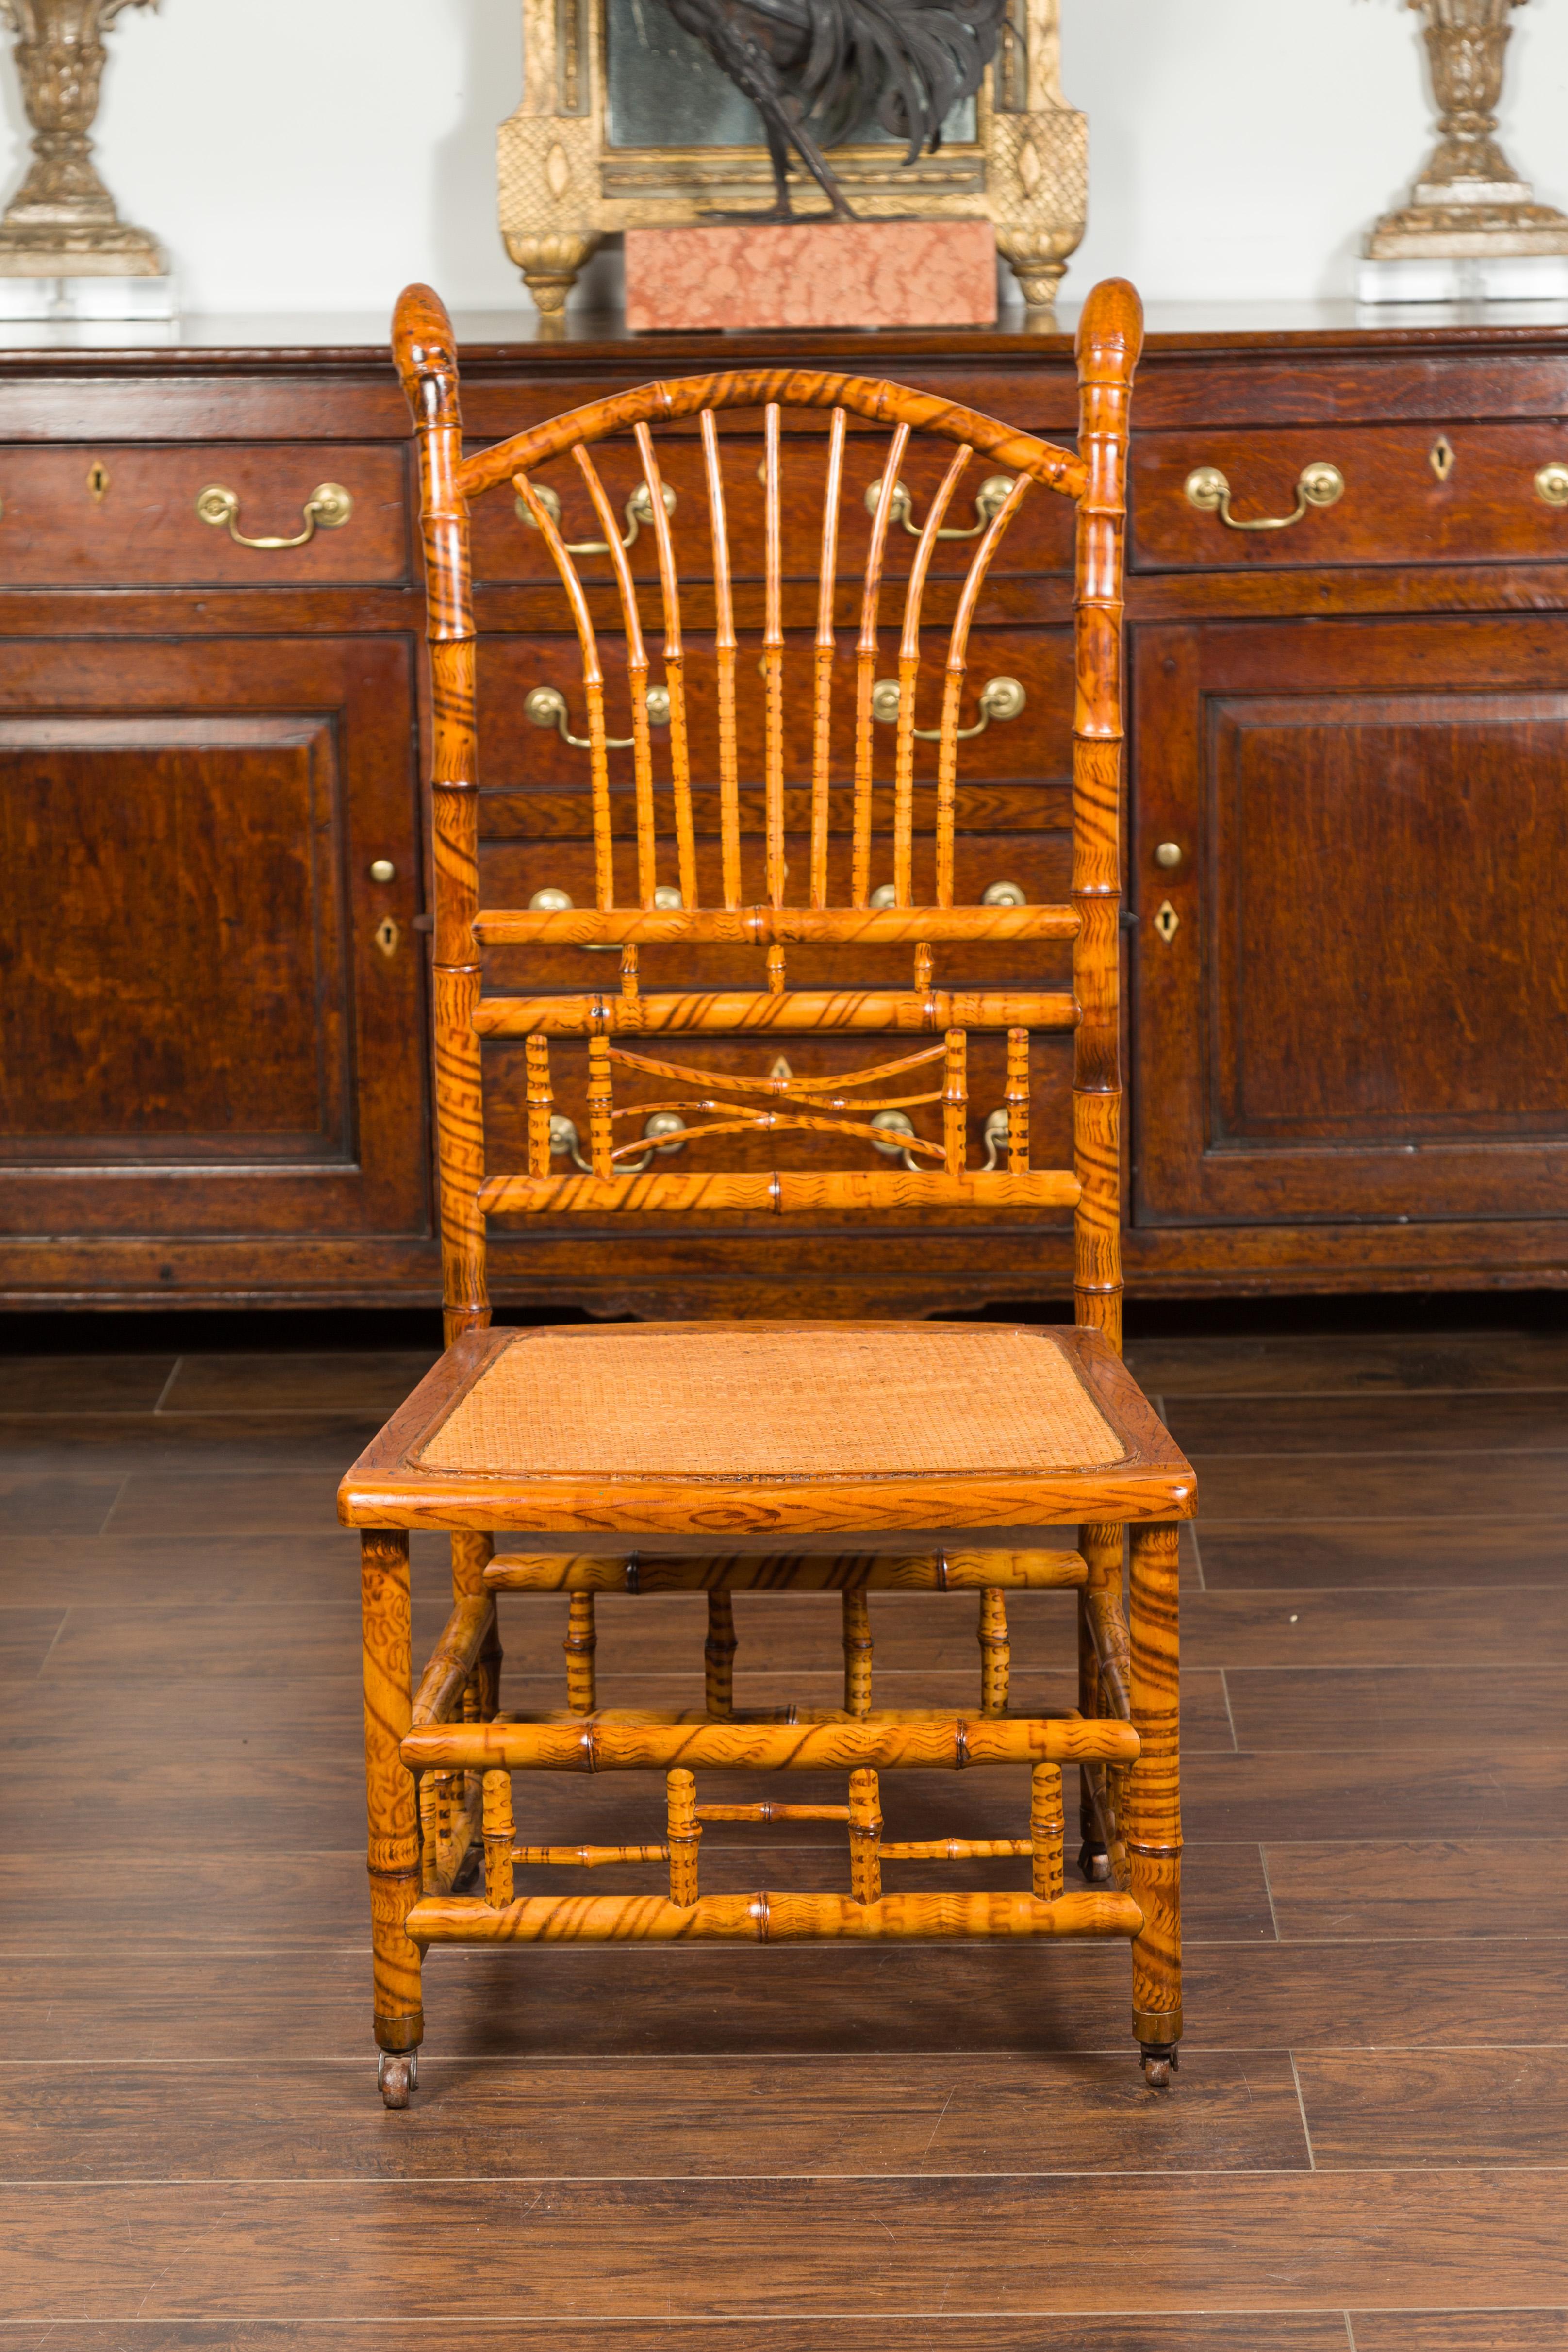 An English bamboo slipper chair from the late 19th century, with fan back, woven rattan seat and casters. Created in England during the last decade of the 19th century, this bamboo slipper chair features a slightly out-curving back adorned with fan